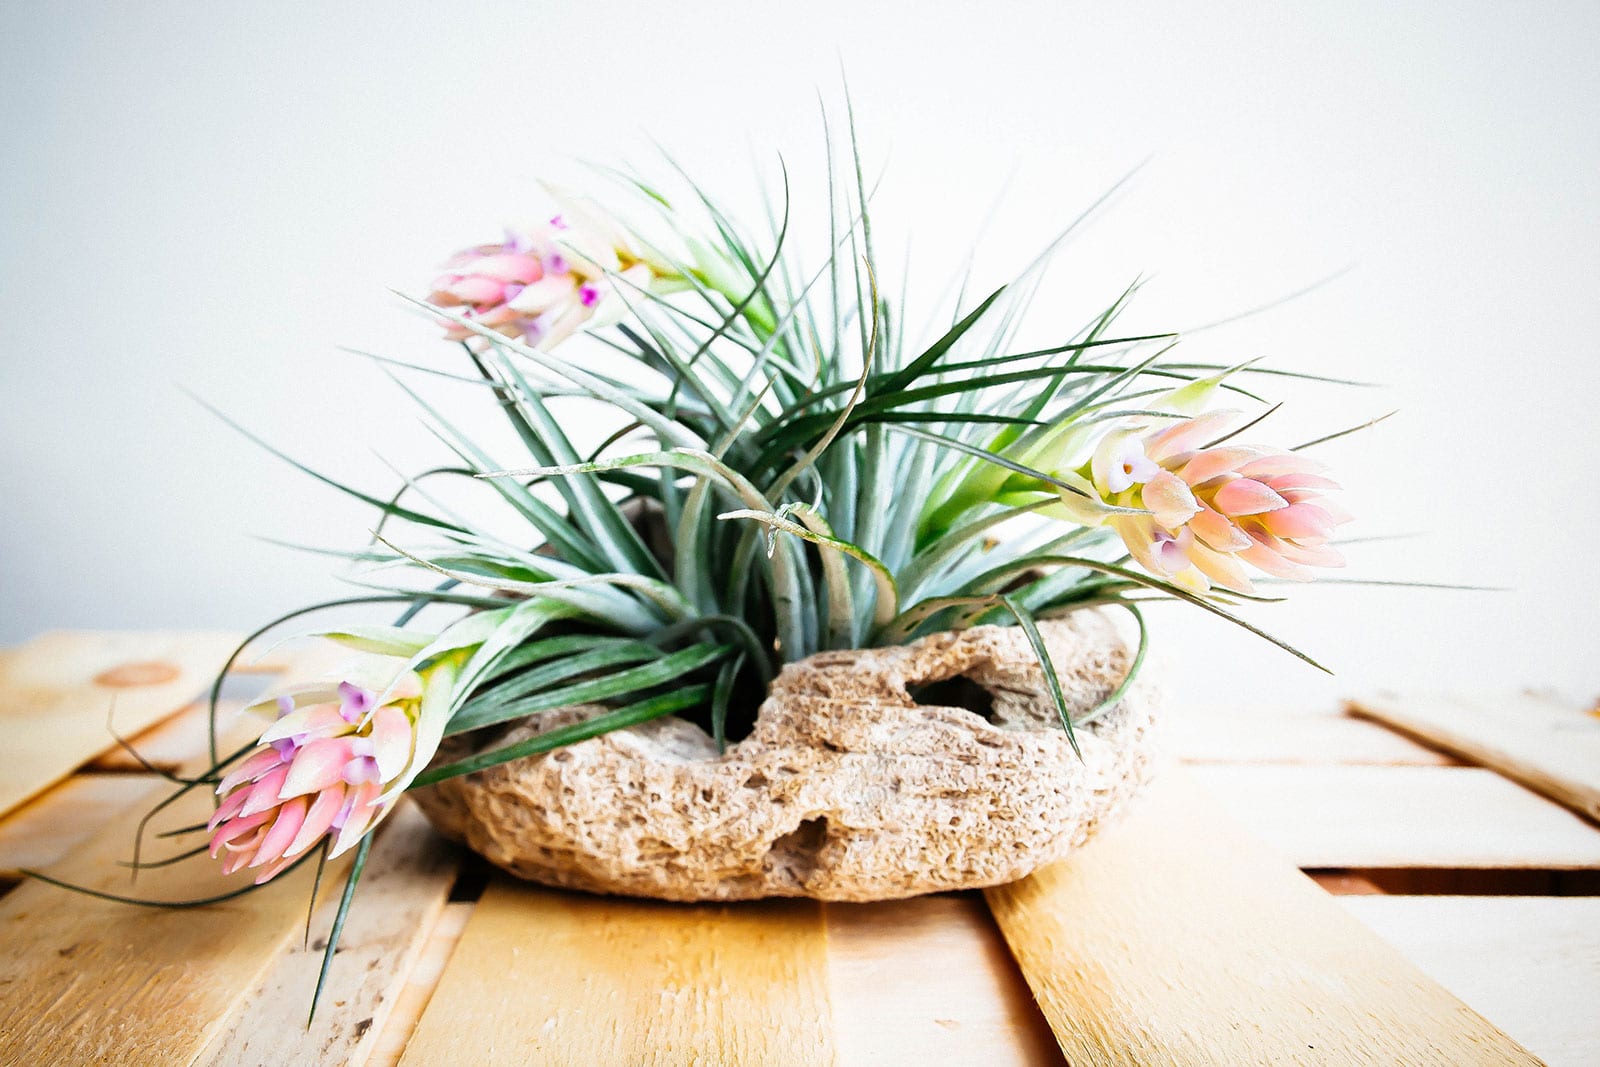 Tillandsia plant in bloom with pink flowers, displayed in a rustic bark container on a wooden table